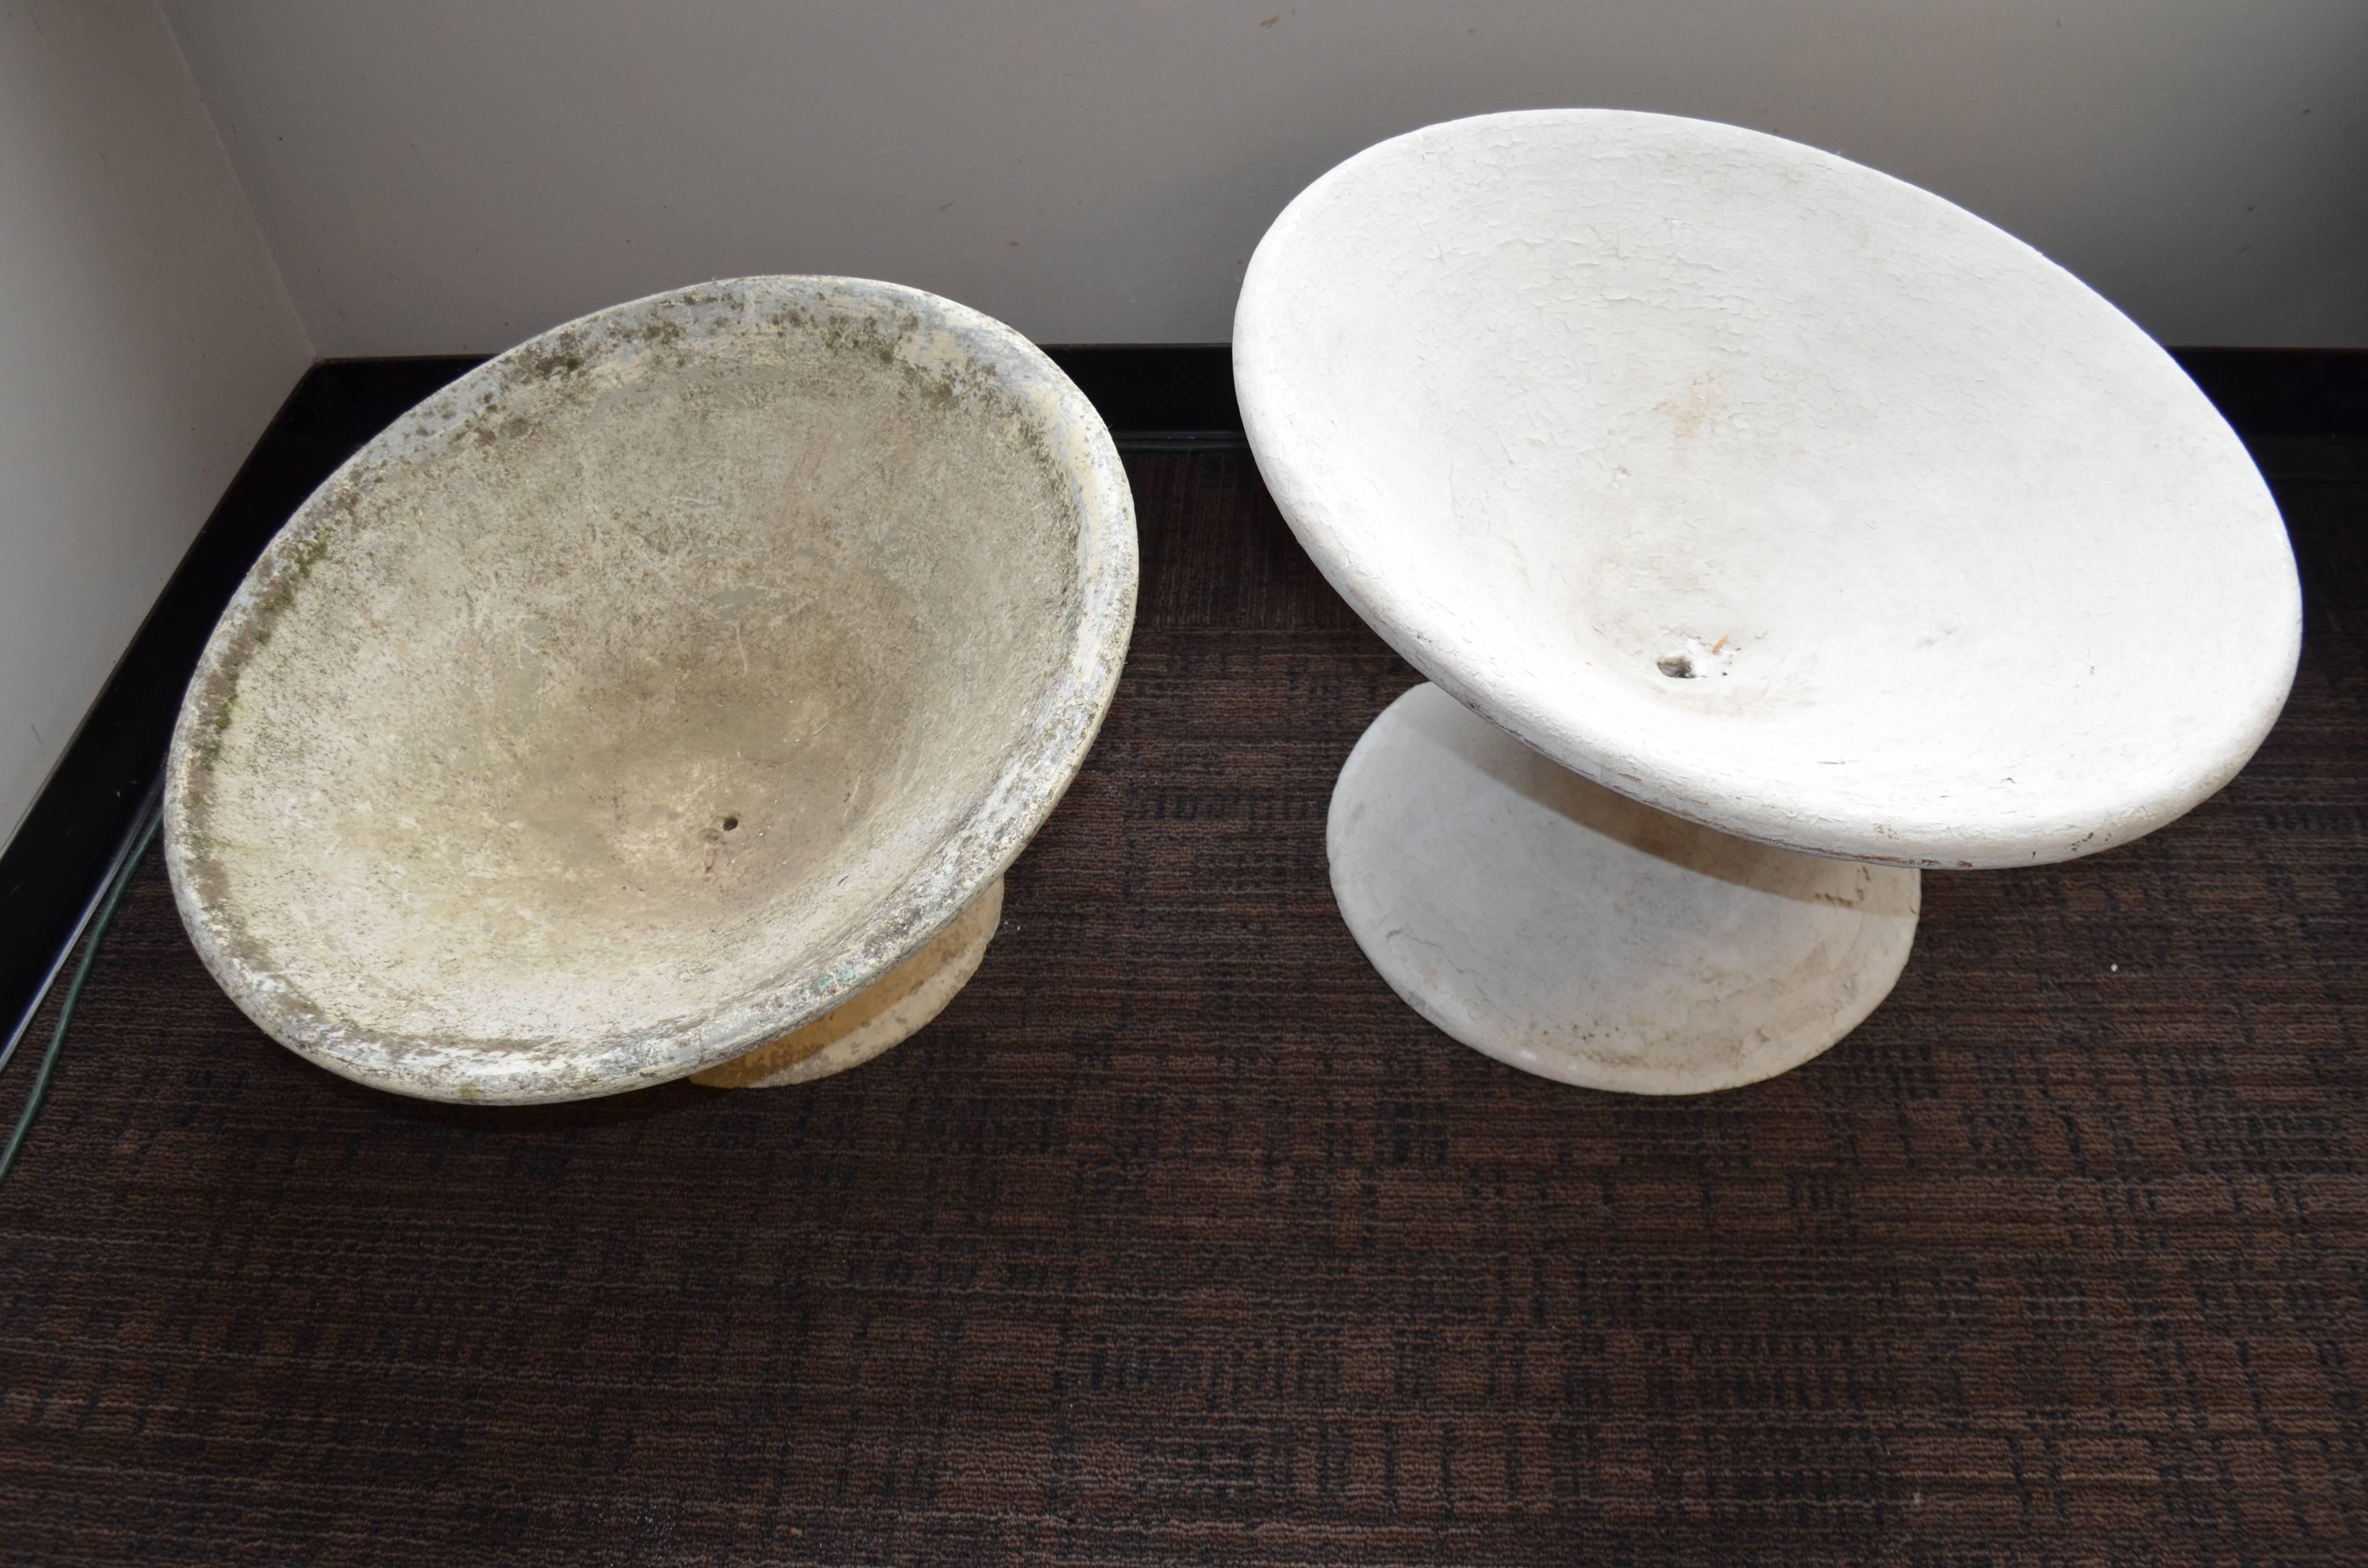 Willy Guhl garden planters of saucer formed stone. One previously painted. One natural offered as a pair. Quite the rare offering from the famed Swiss designer. Paint can be easily removed from the one if desired. We like the contrasting color